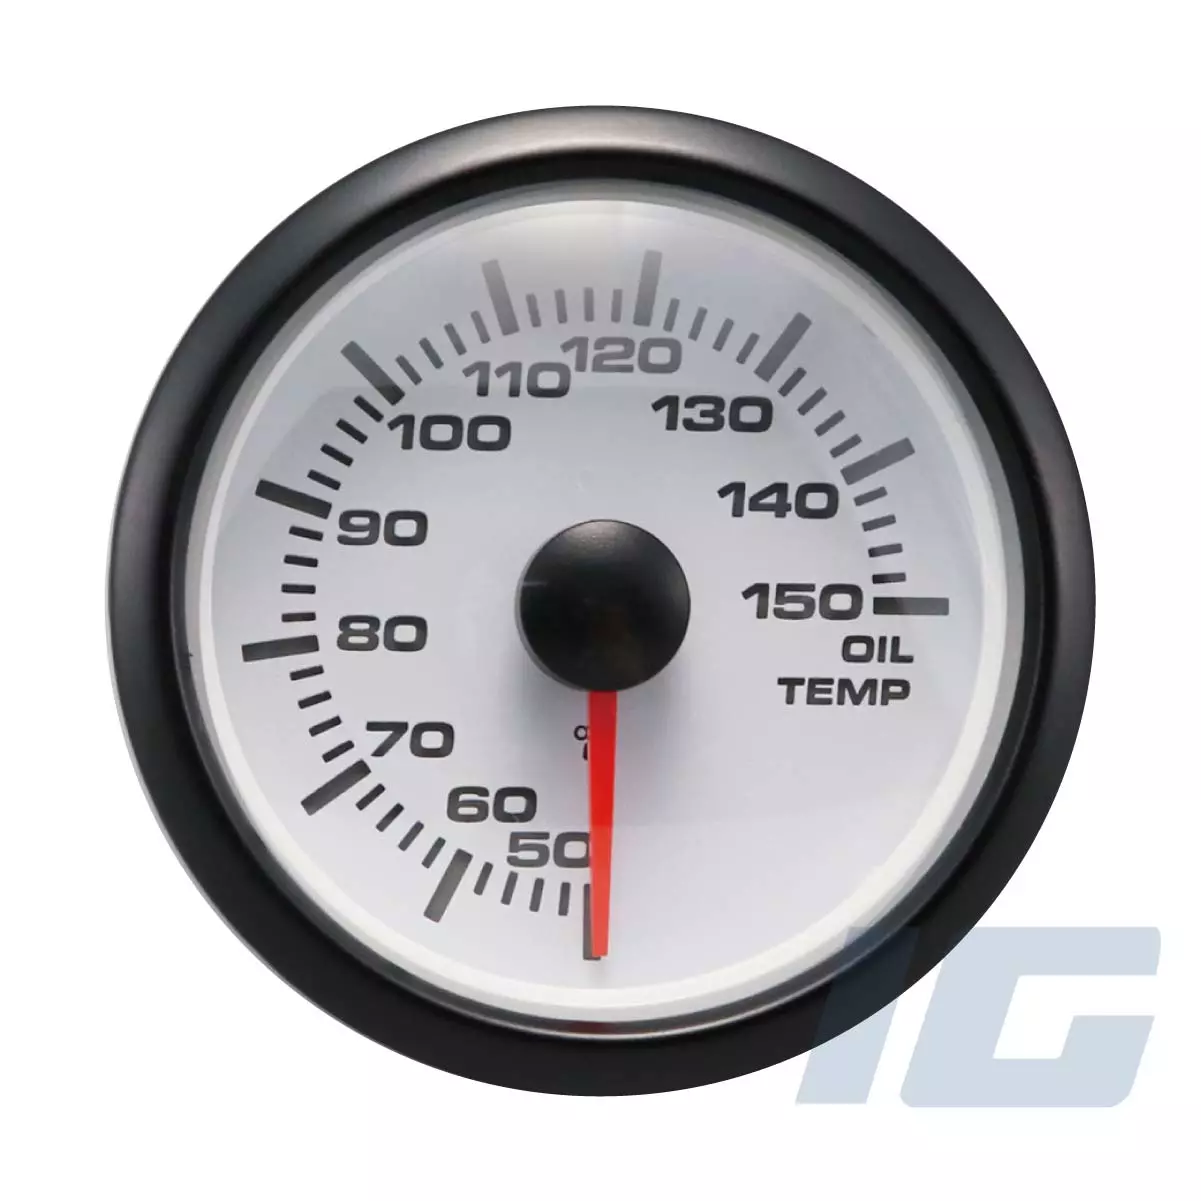 igauge, MGS Series, 52mm, White Face, Aftermarket, Marine, Gauge, Boat, Outboard, Oil Temperature